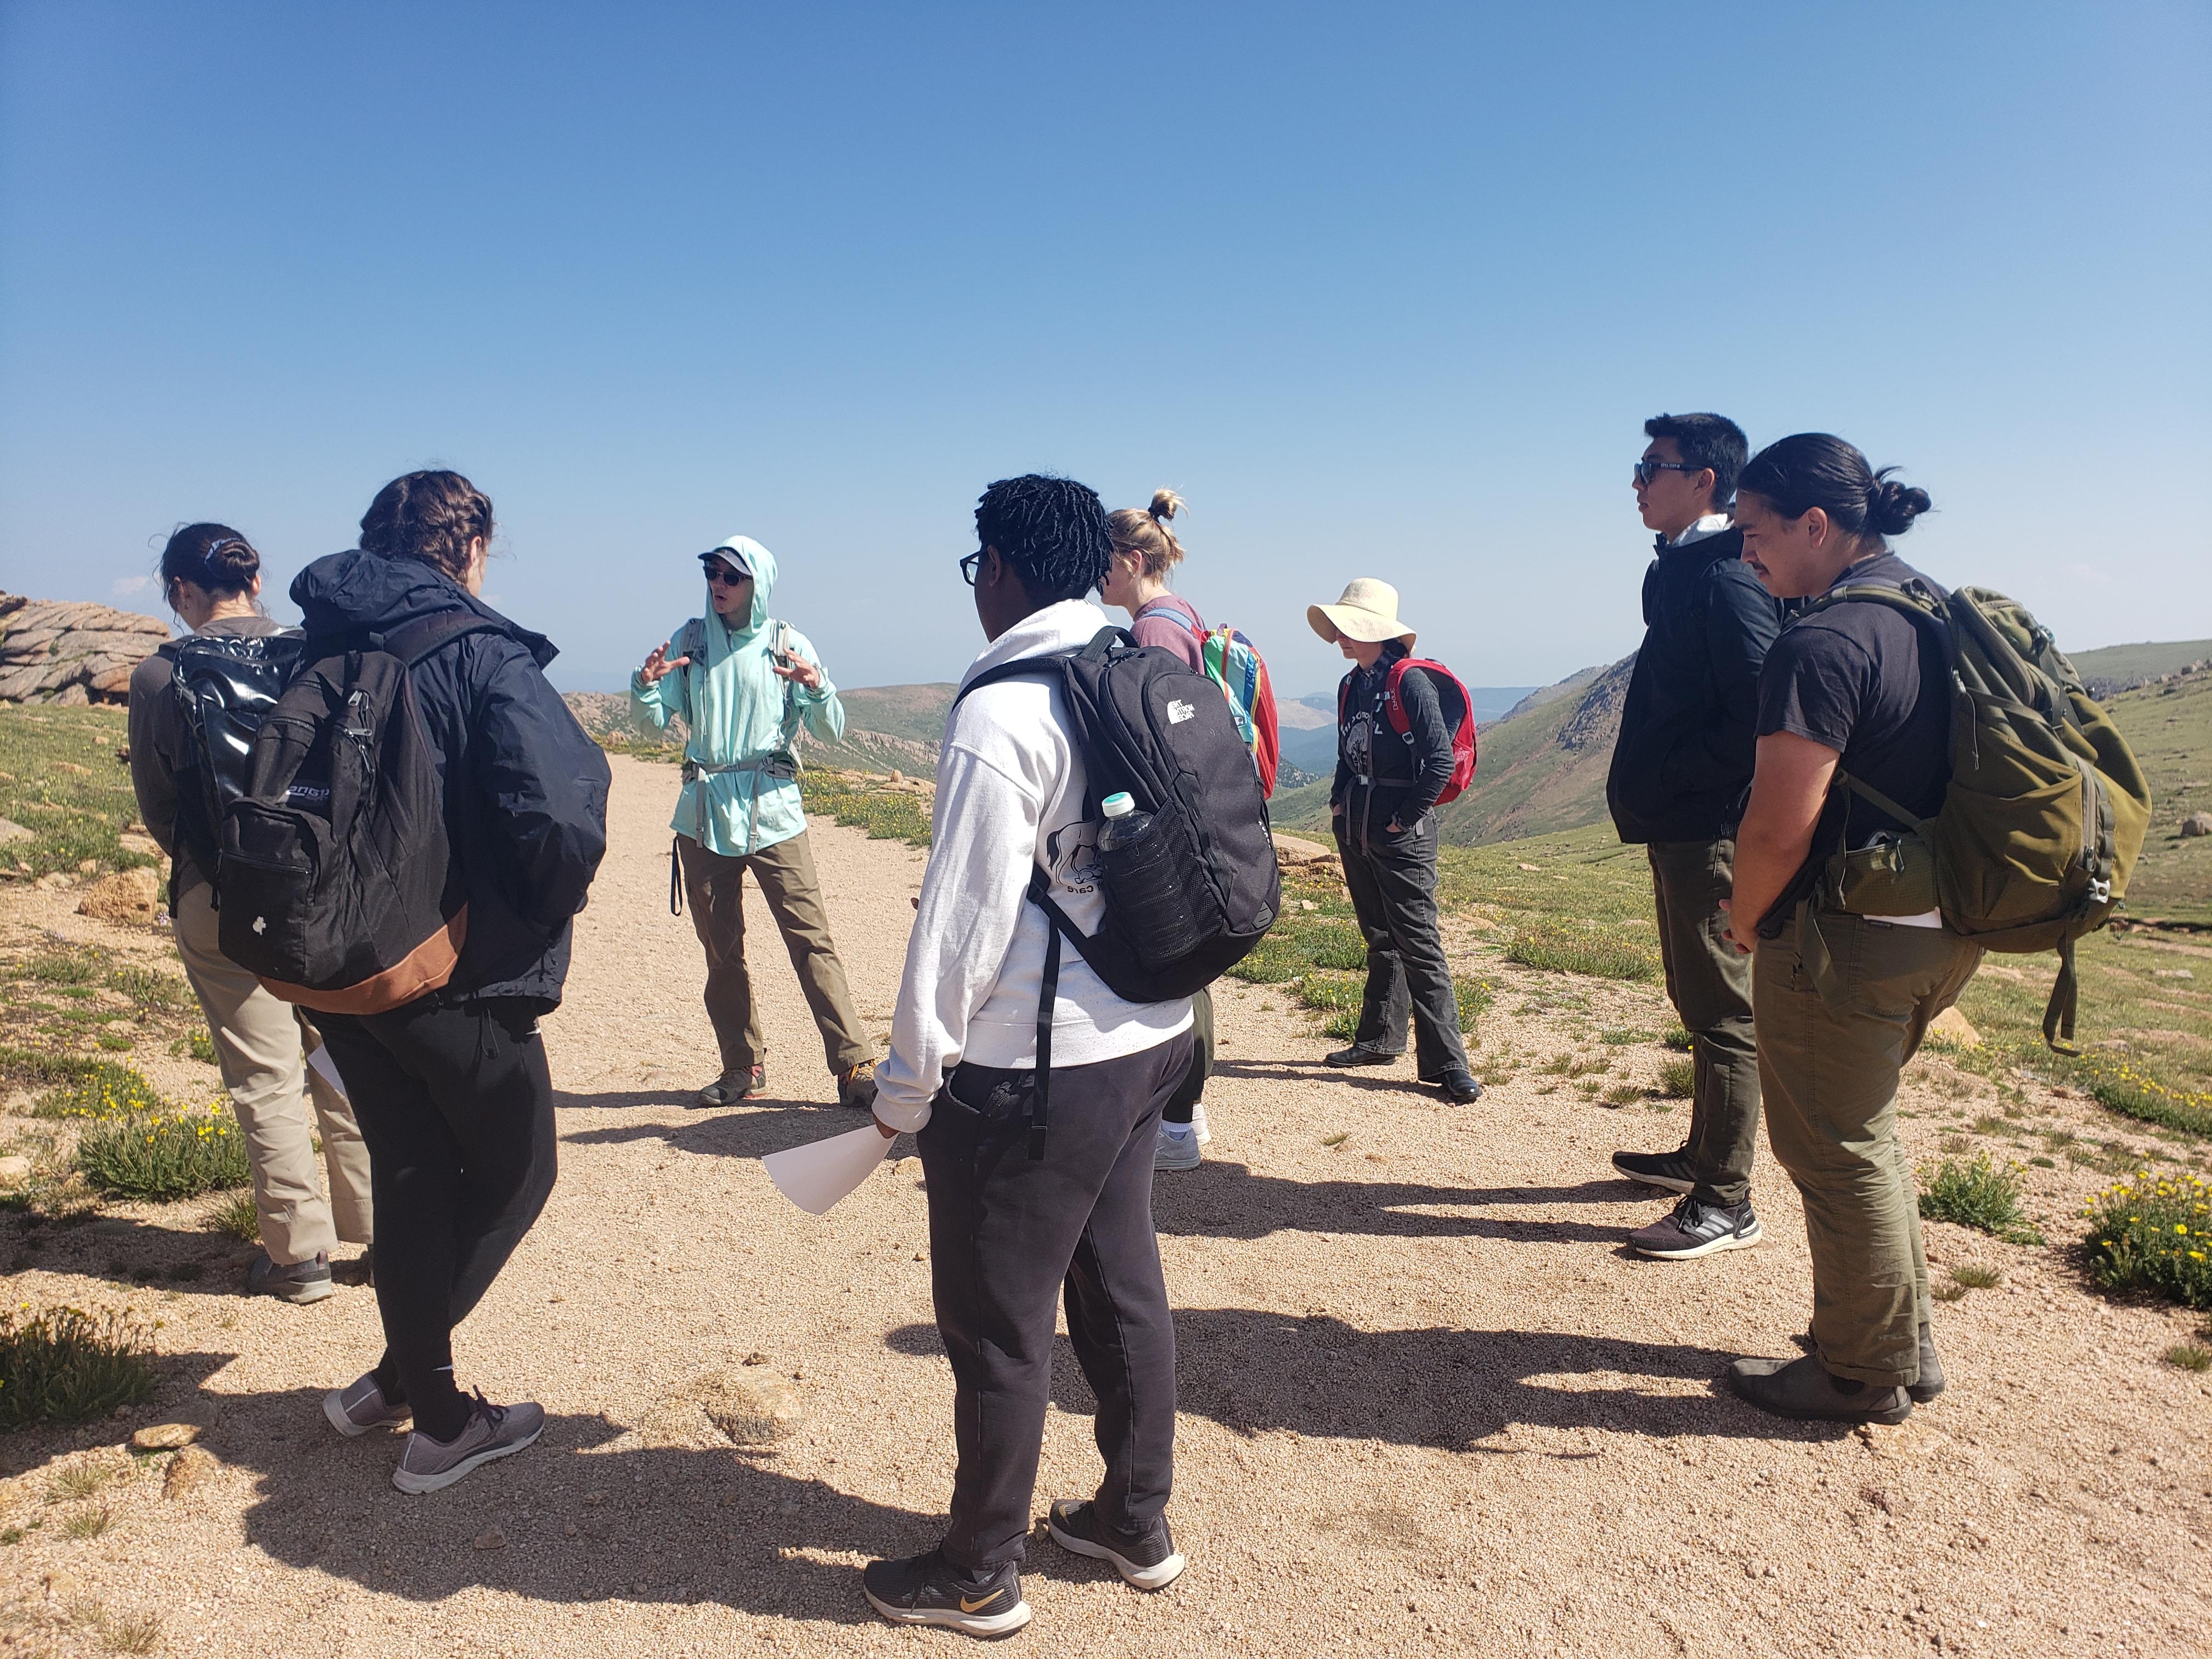 Students in Dr. Jabaily's Field Botany course learn about alpine plants on Pikes Peak, with help from Advanced Field Botany student, Zach Ginn, who has been conducting plant-pollinator interaction studies there throughout the summer. <span class="cc-gallery-credit">[Rachel Jabaily]</span>